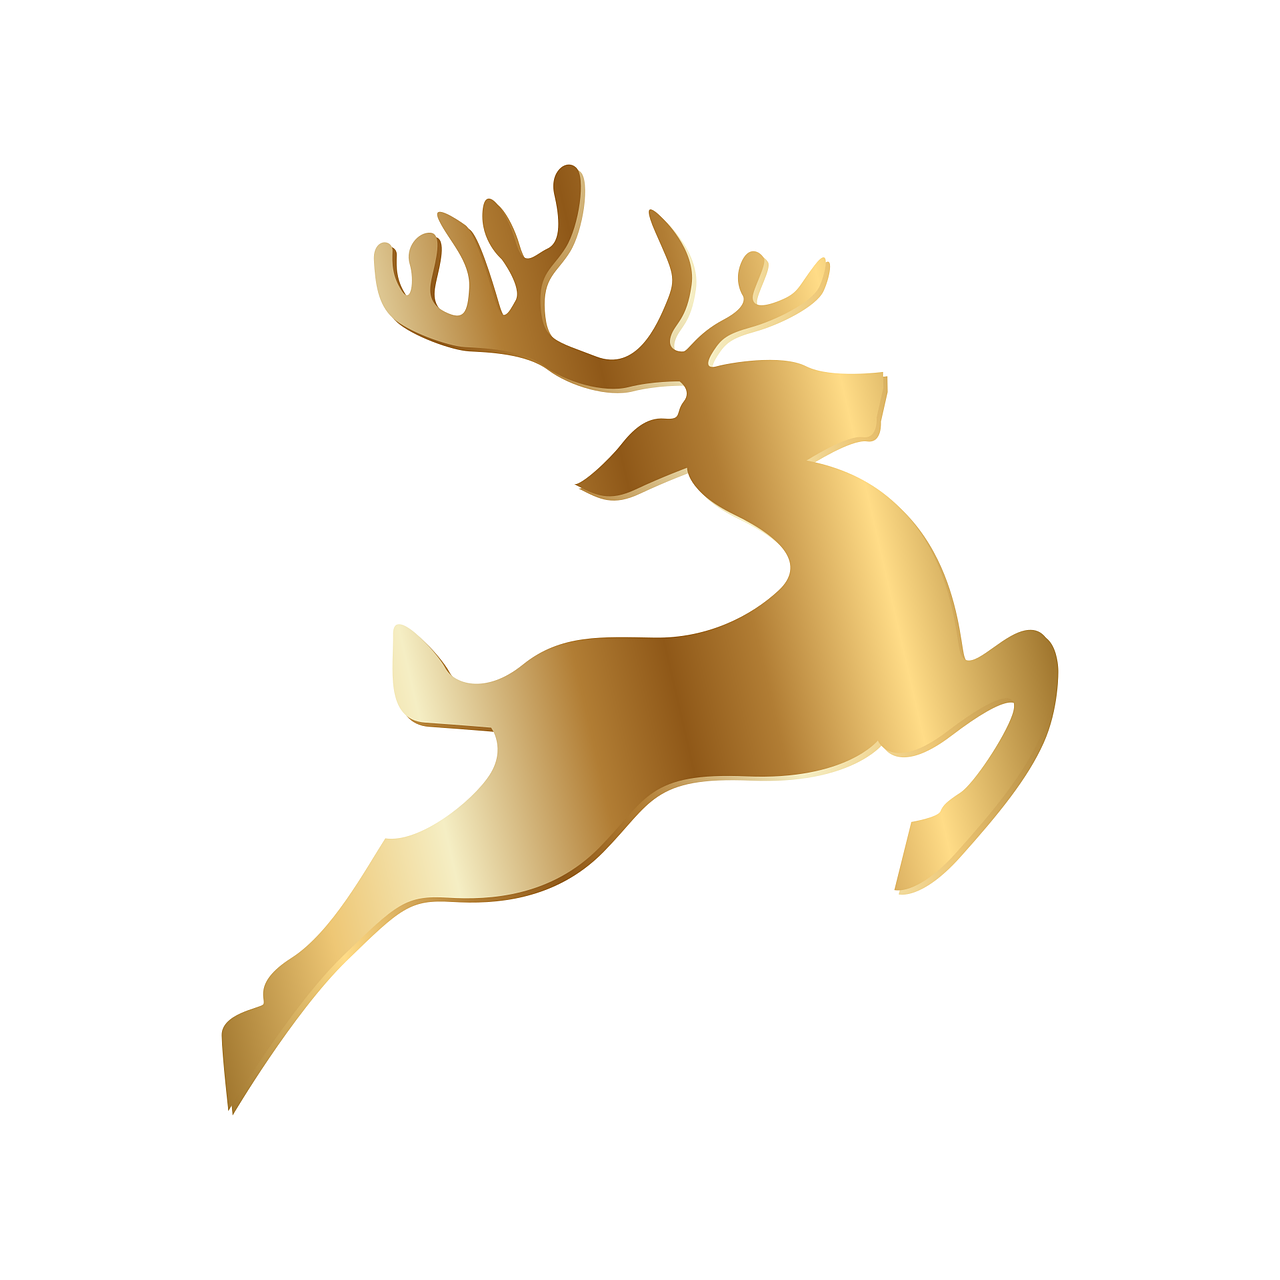 a golden reindeer leaping in the air, a picture, art deco, minimalist logo without text, gold and luxury materials, japan, metal body